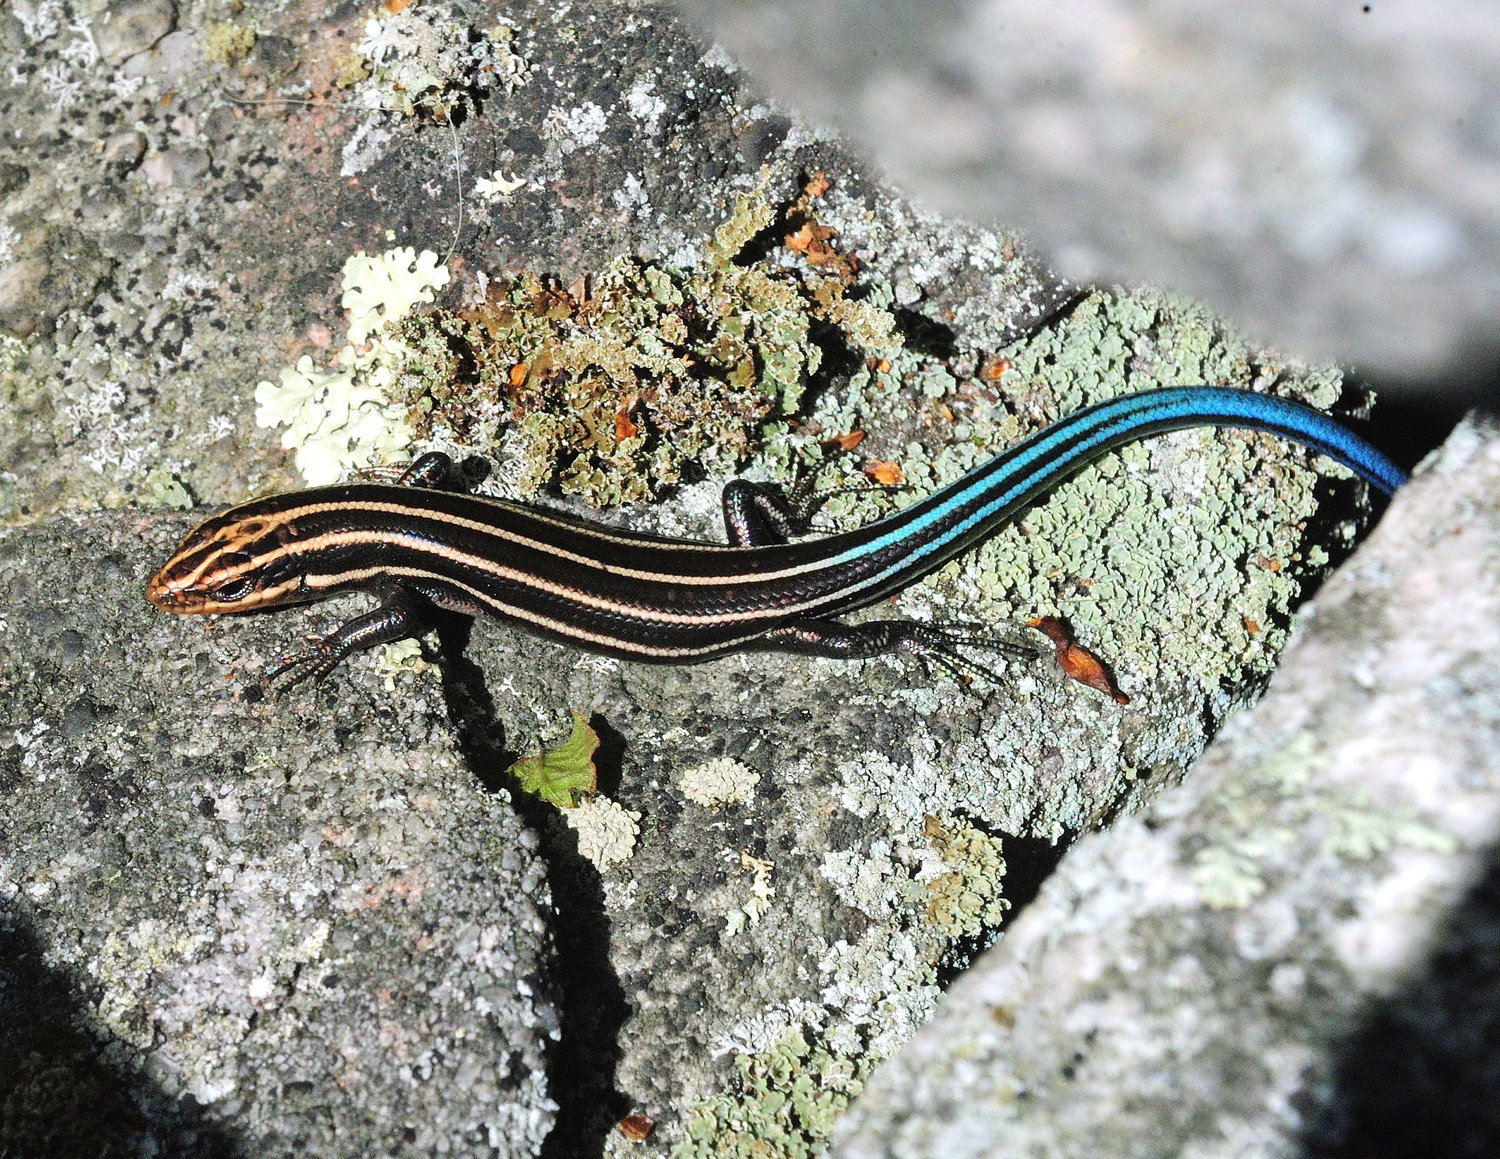 This five-lined skink shows the hallmark bright blue tail seen on younger individuals. The lines are also very distinct on younger animals. Five-lined skinks are insect eaters, preying on things they can grab such as crickets and grasshoppers.